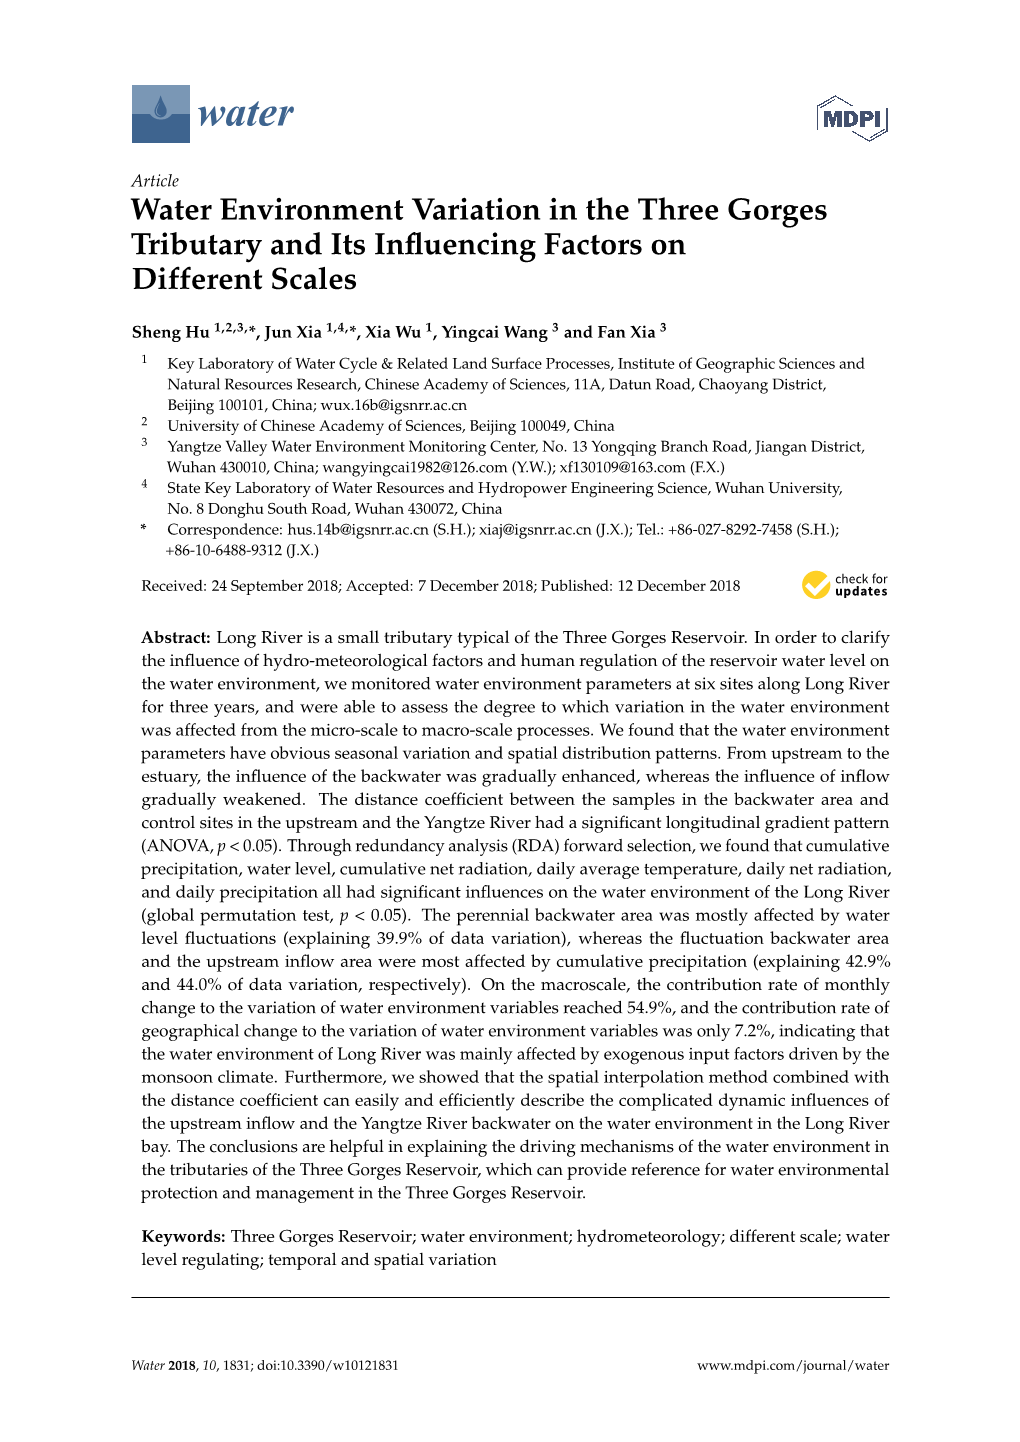 Water Environment Variation in the Three Gorges Tributary and Its Inﬂuencing Factors on Different Scales